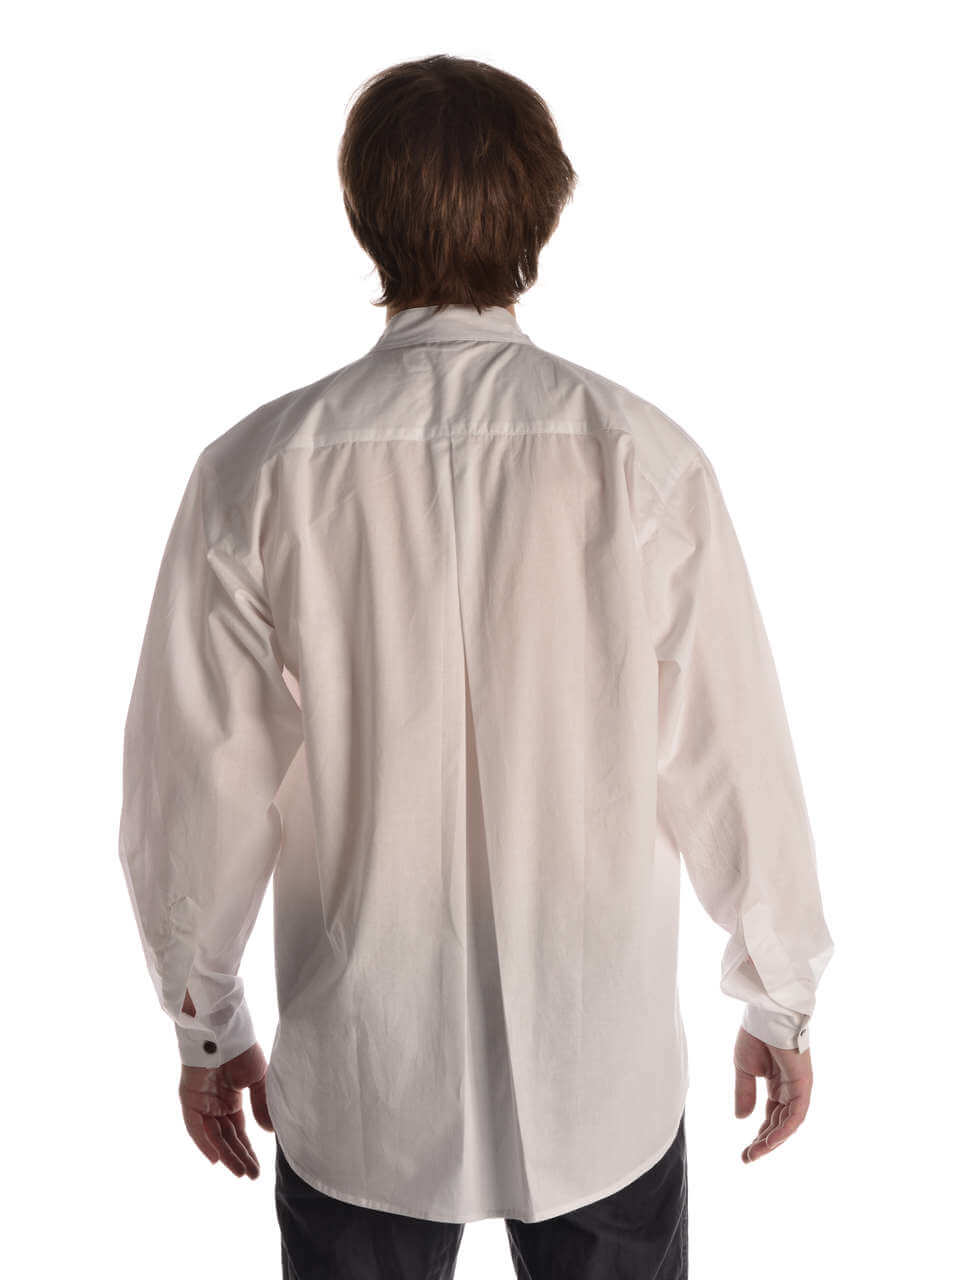 Medieval Shirt Iwein buy online, HEMAD medieval clothing shop online